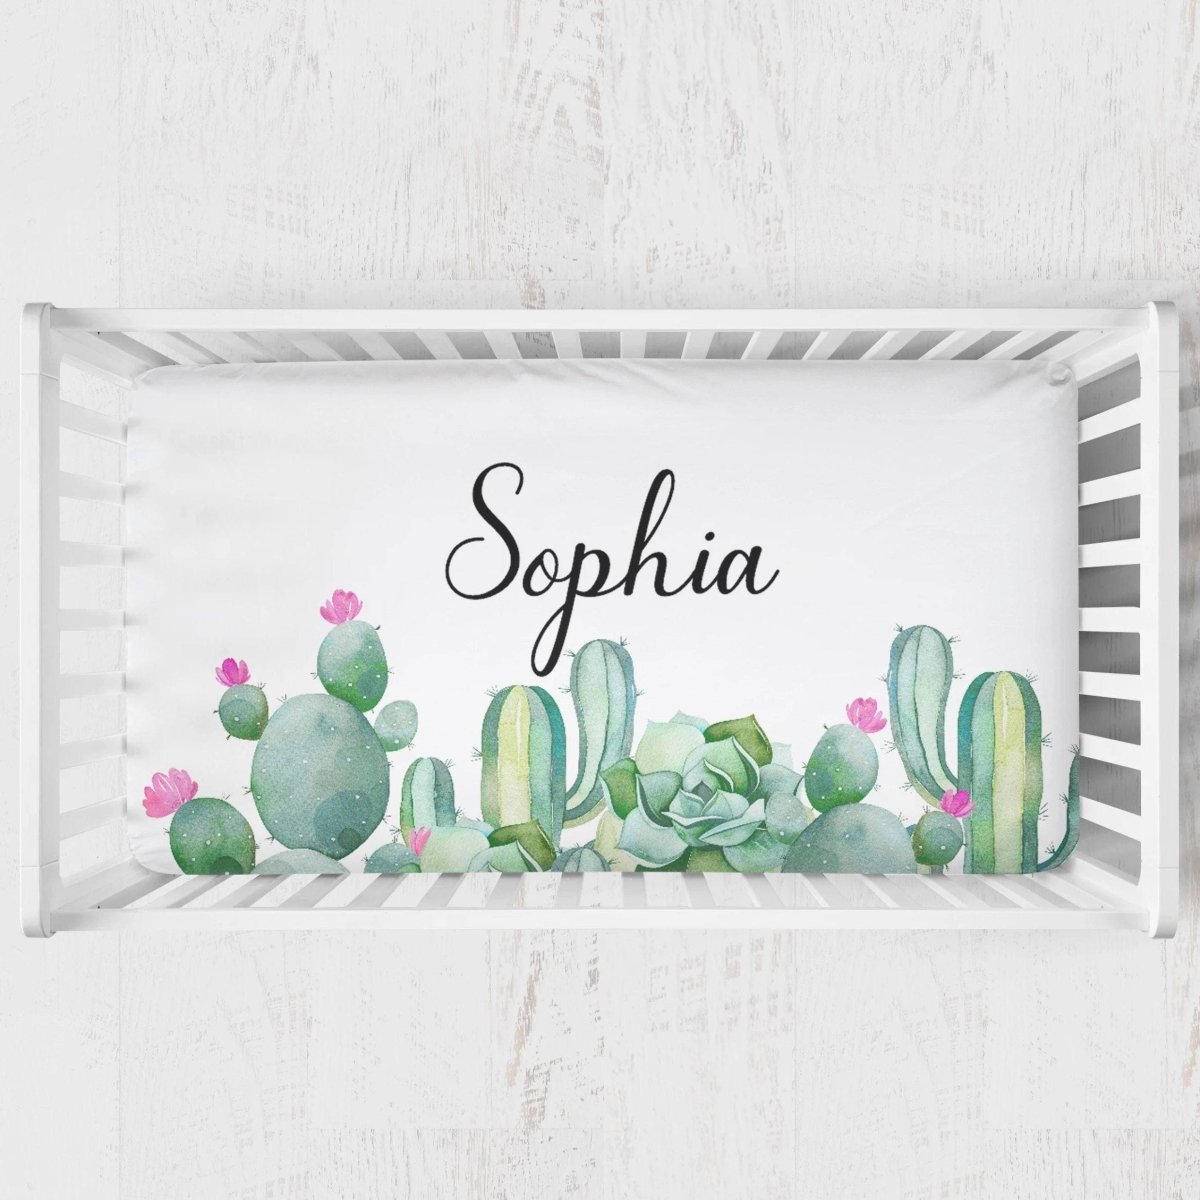 Llama Love Personalized Cactus Crib Sheet - gender_girl, Personalized_Yes, text